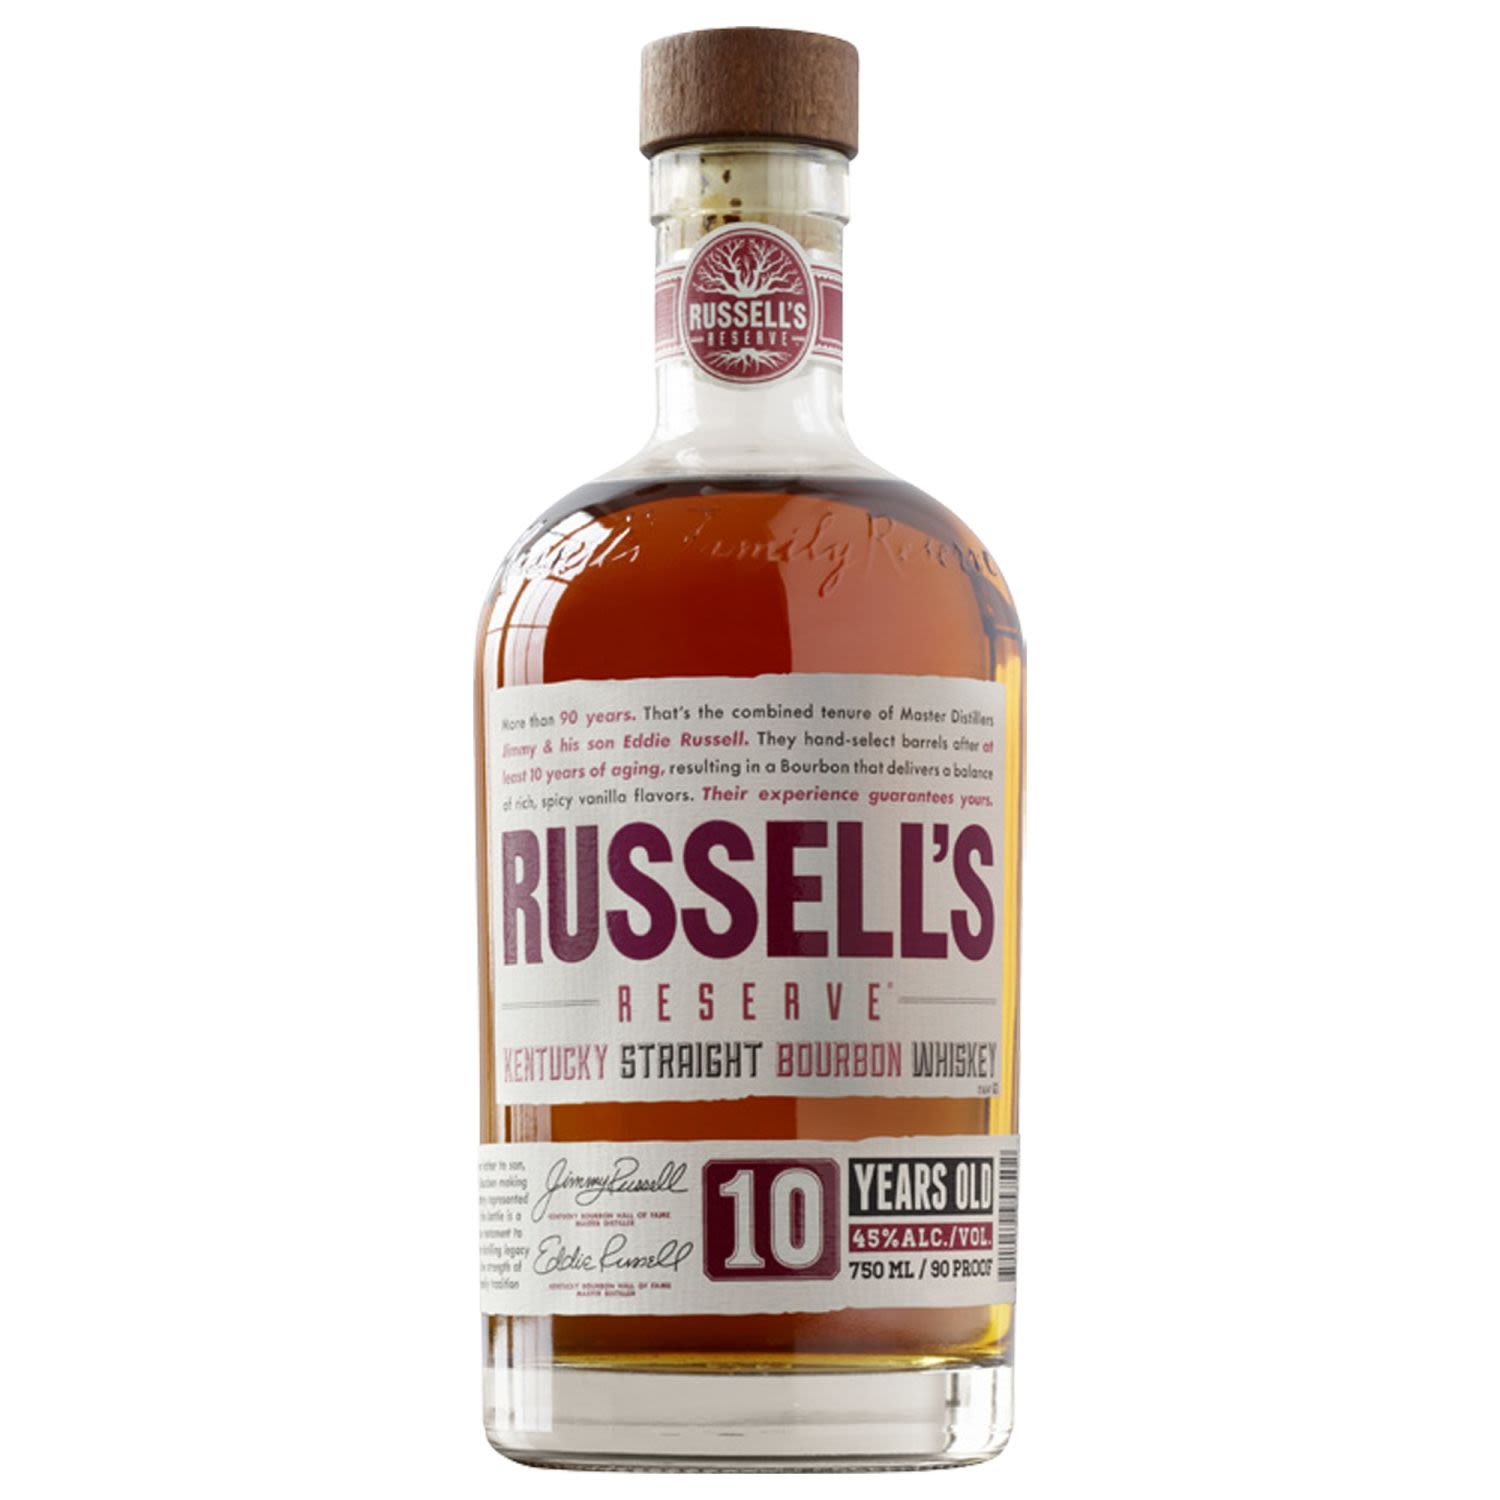 Russell's Reserve 10 Year Old Kentucky Straight Bourbon Whiskey 750mL Bottle